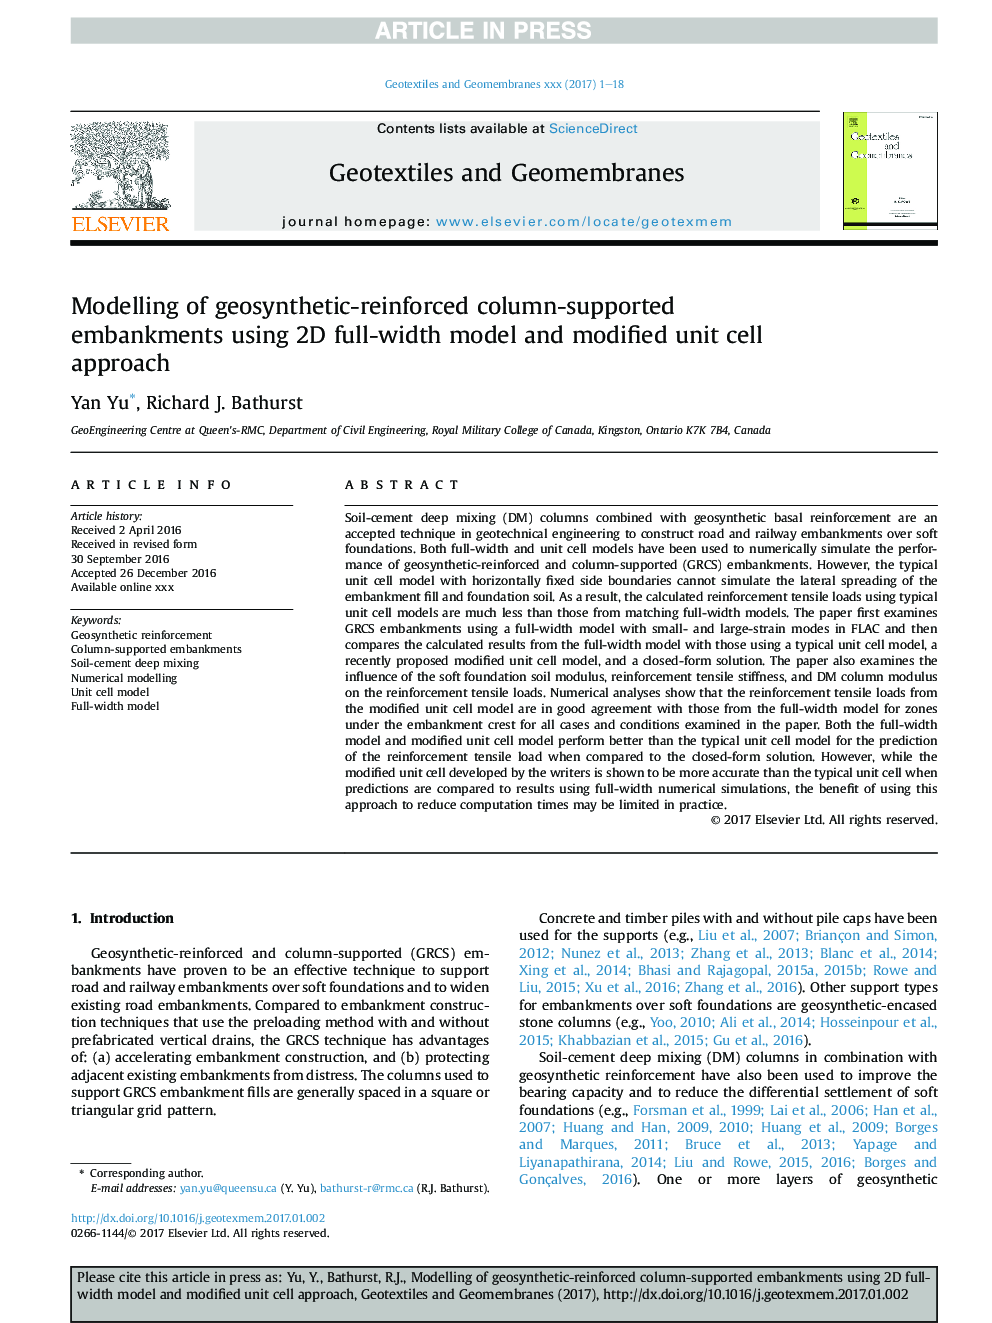 Modelling of geosynthetic-reinforced column-supported embankments using 2D full-width model and modified unit cell approach